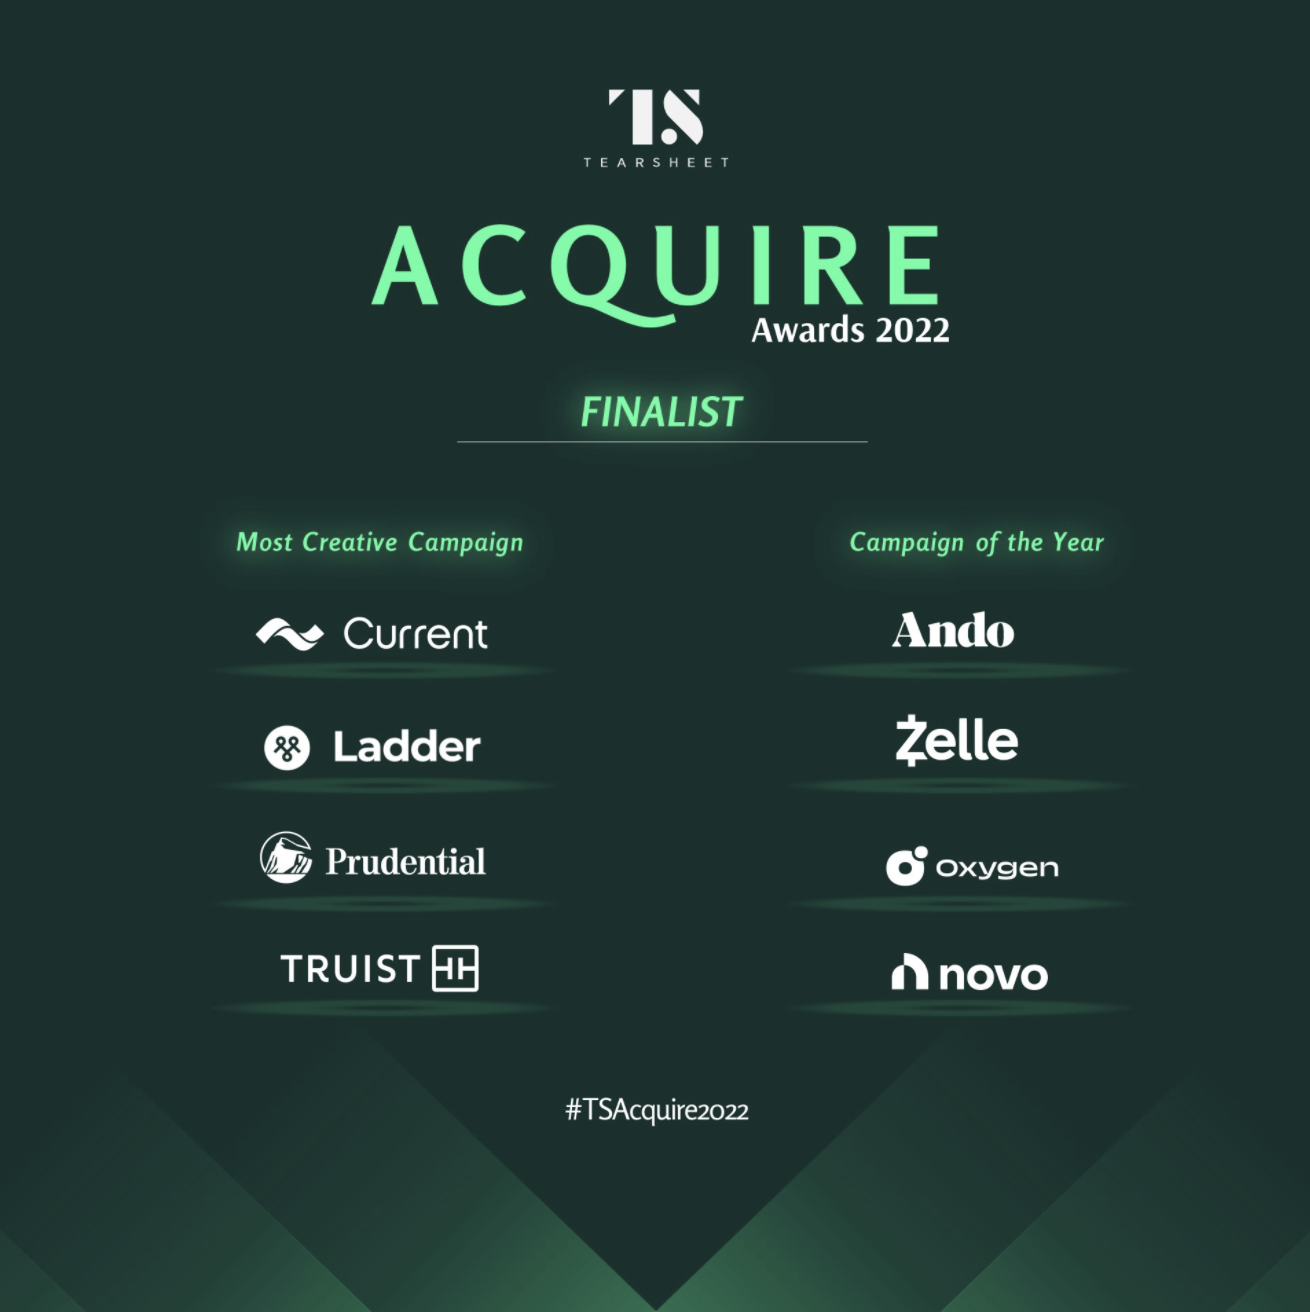 Tearsheet Acquire Awards 2022